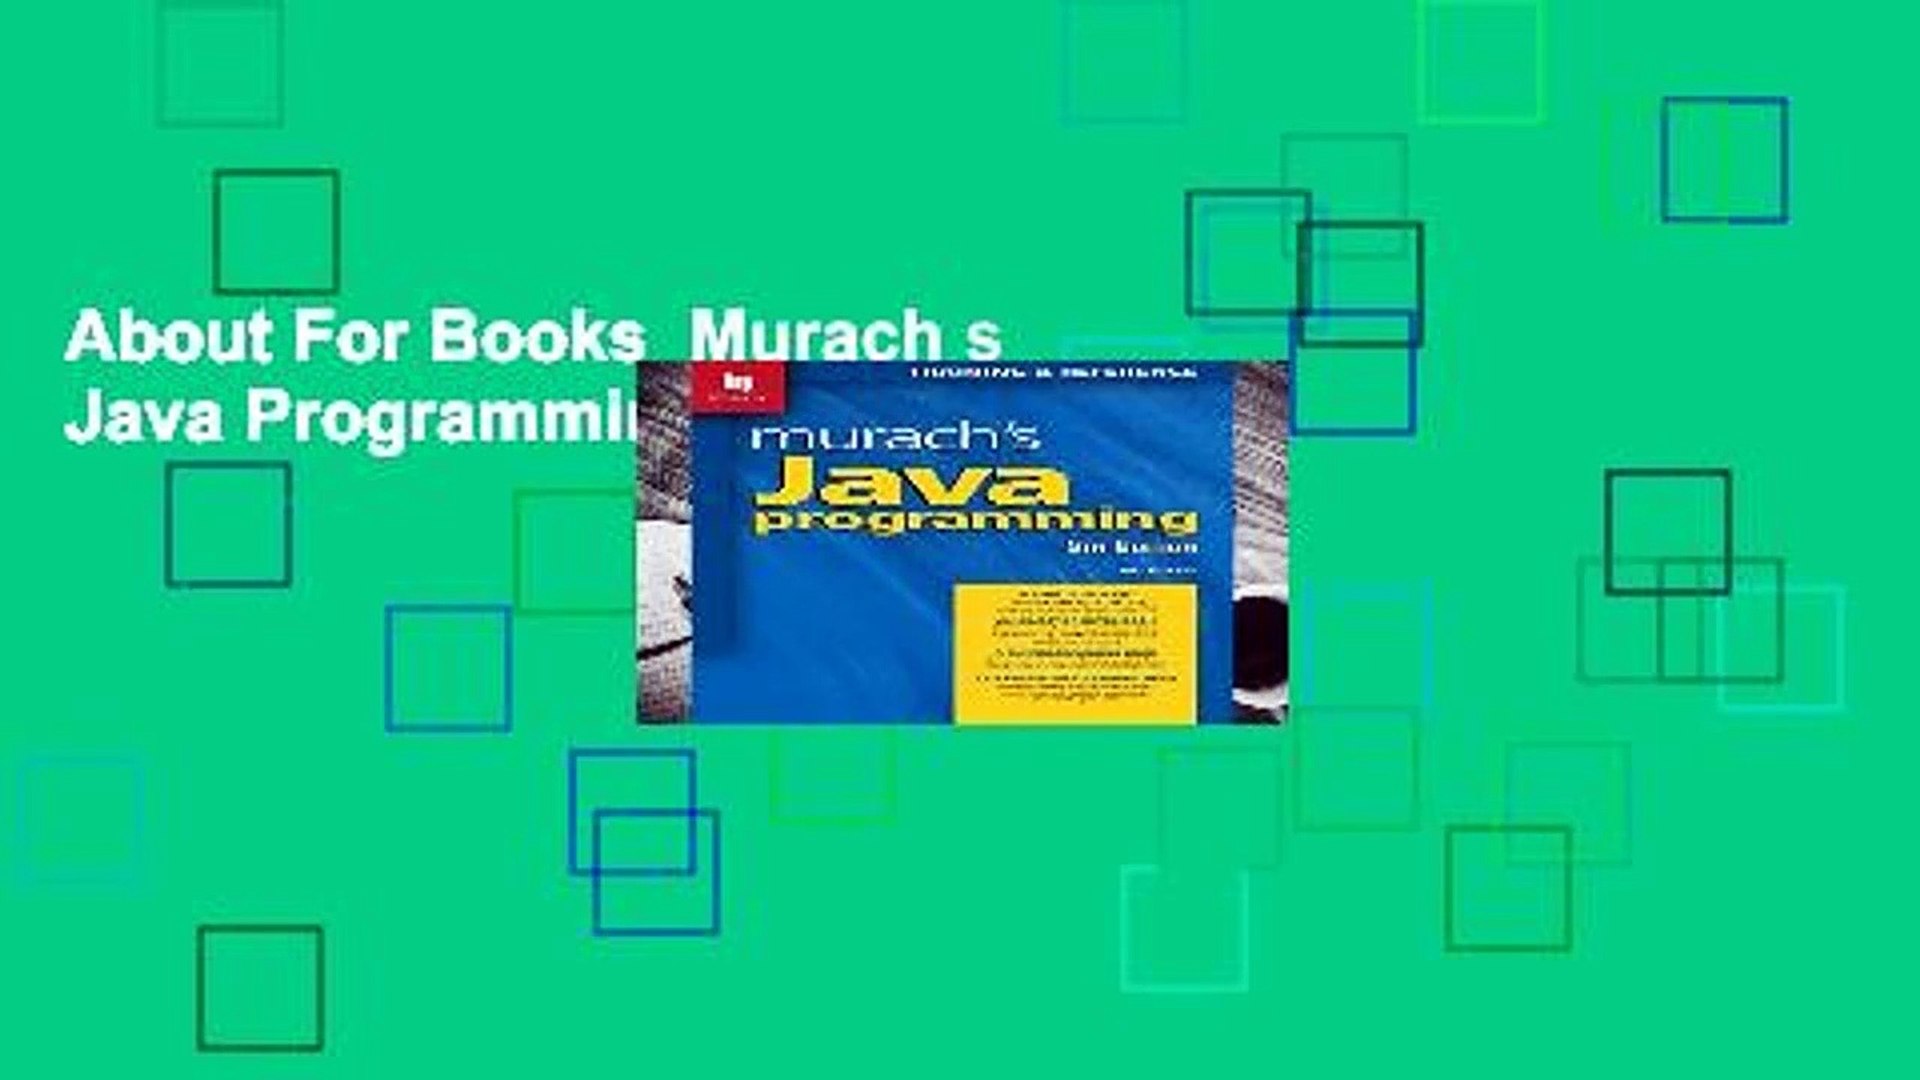 About For Books  Murach s Java Programming  For Kindle